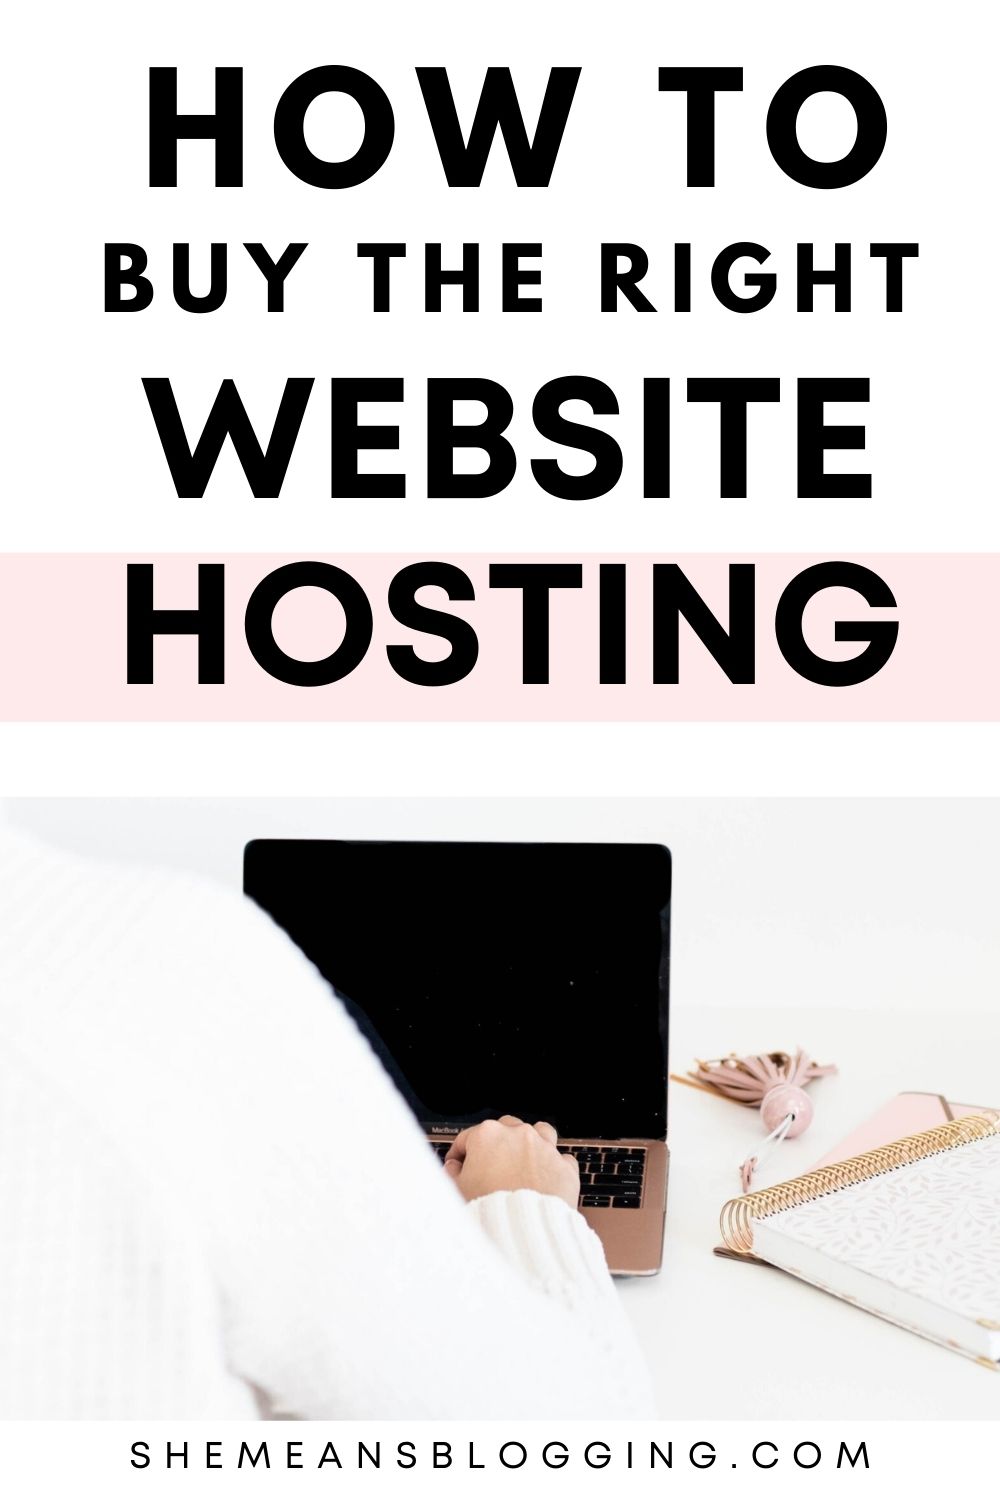 How to find the best web hosting for beginners to start a blog? What to look for when buying a web host? Get started with this web hosting checklist and guidelines here! Follow these simple expert tips to select the best web host.